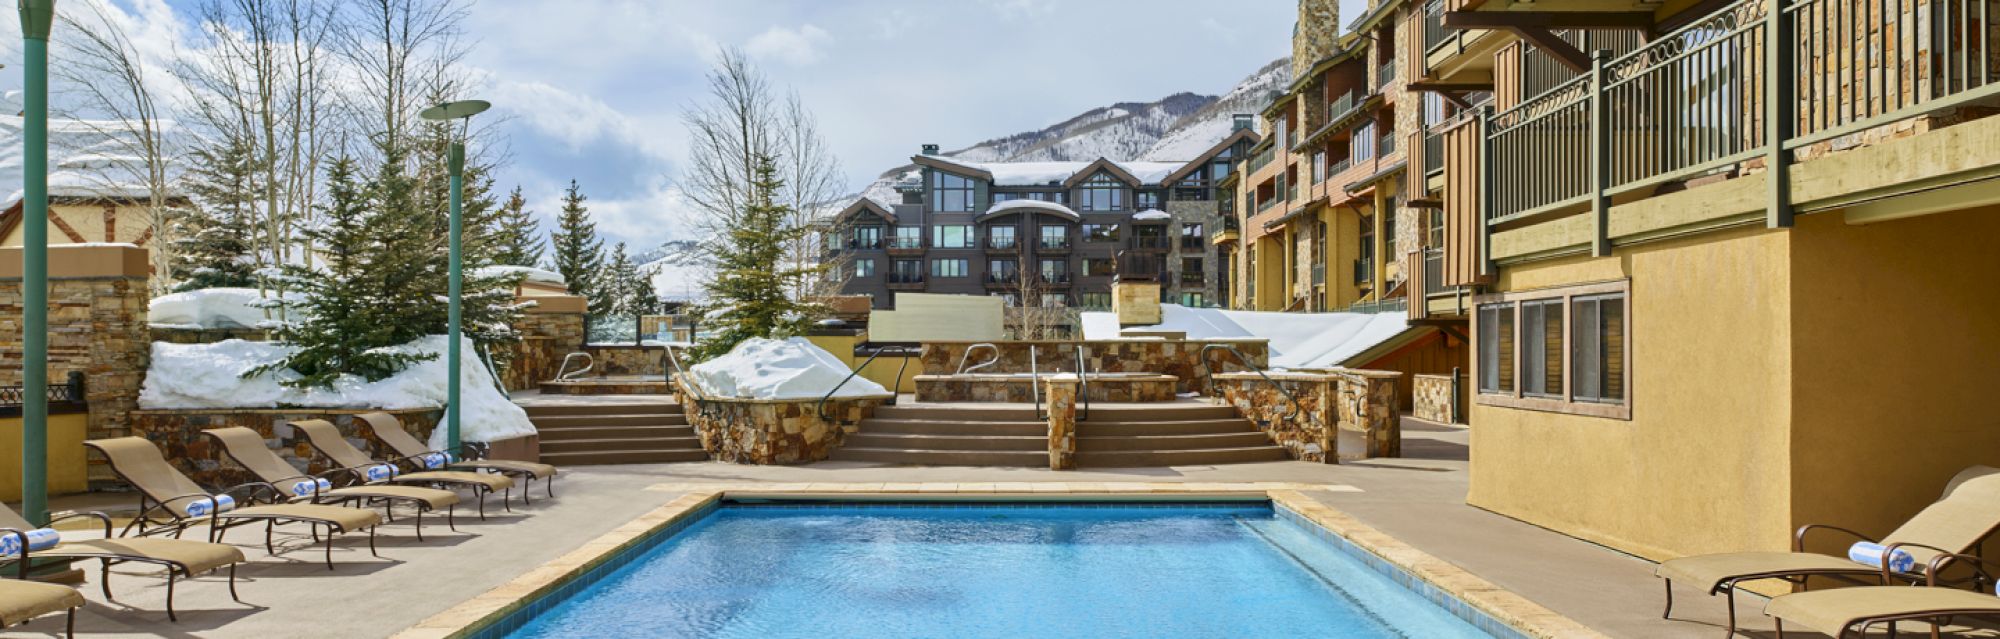 An outdoor pool area with lounge chairs, surrounded by snow, condo buildings, and trees; there's a mountain in the background.